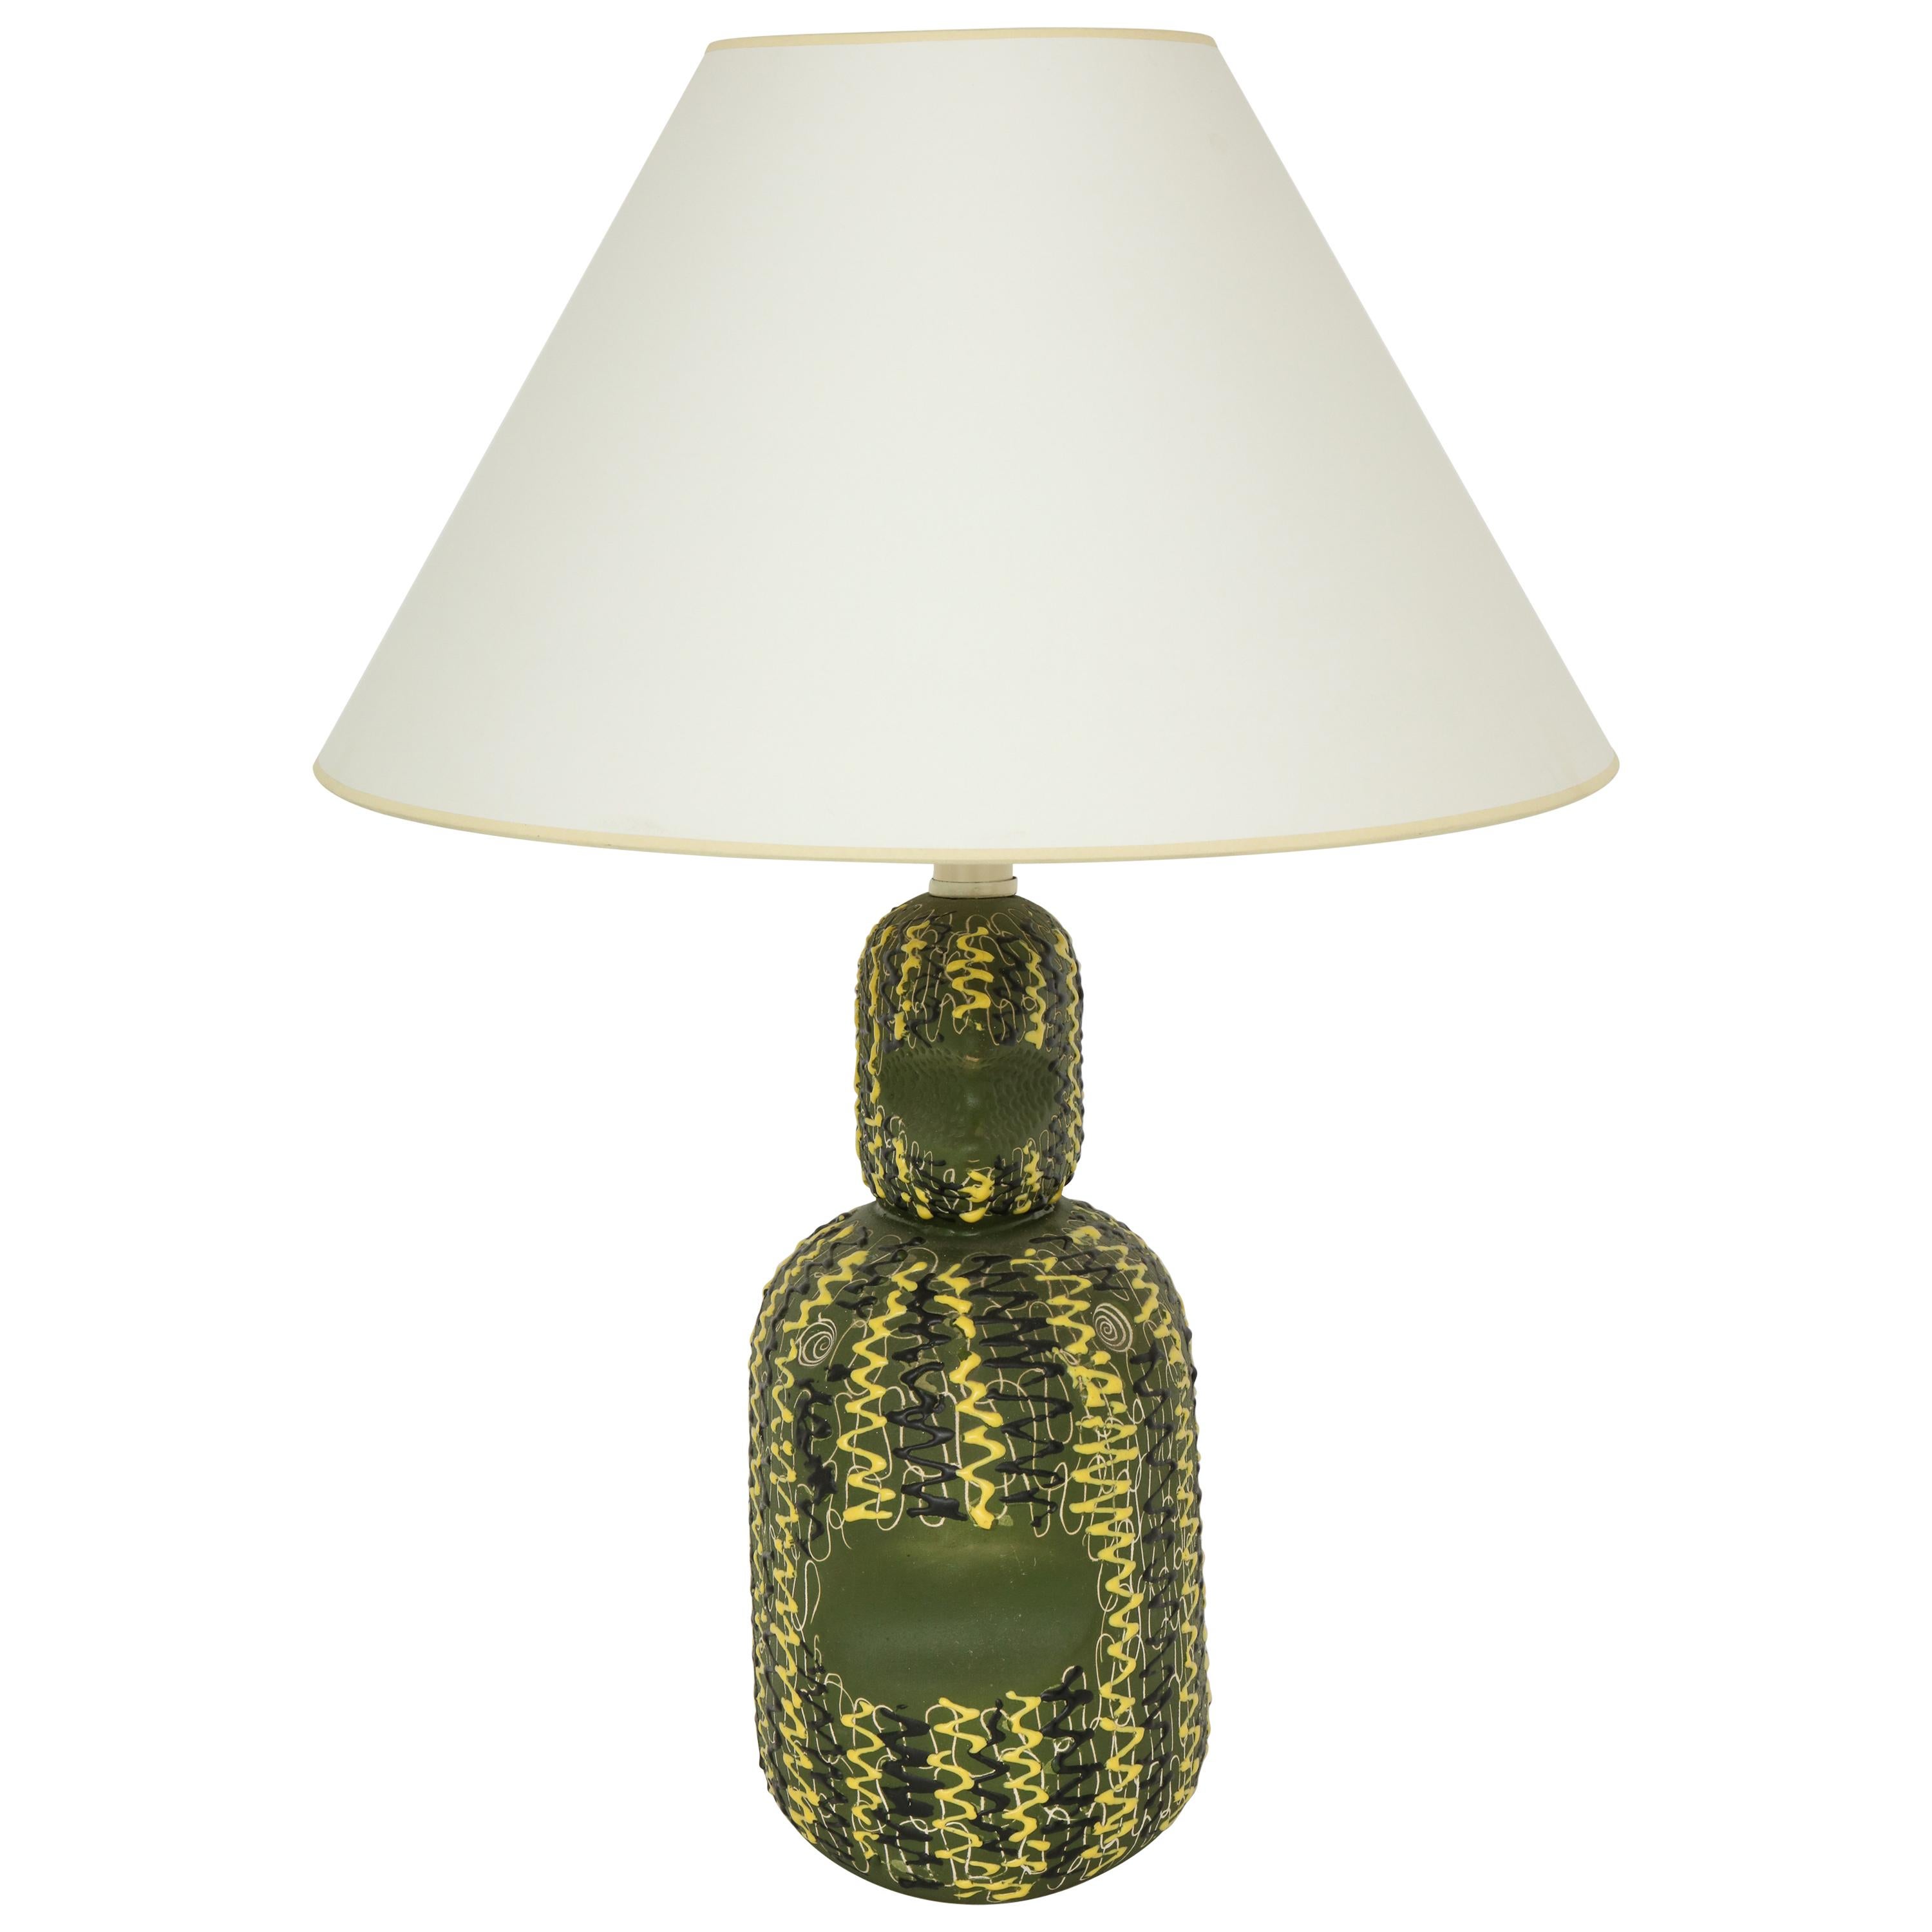 Midcentury Italian Green and Yellow Ceramic Table Lamp For Sale